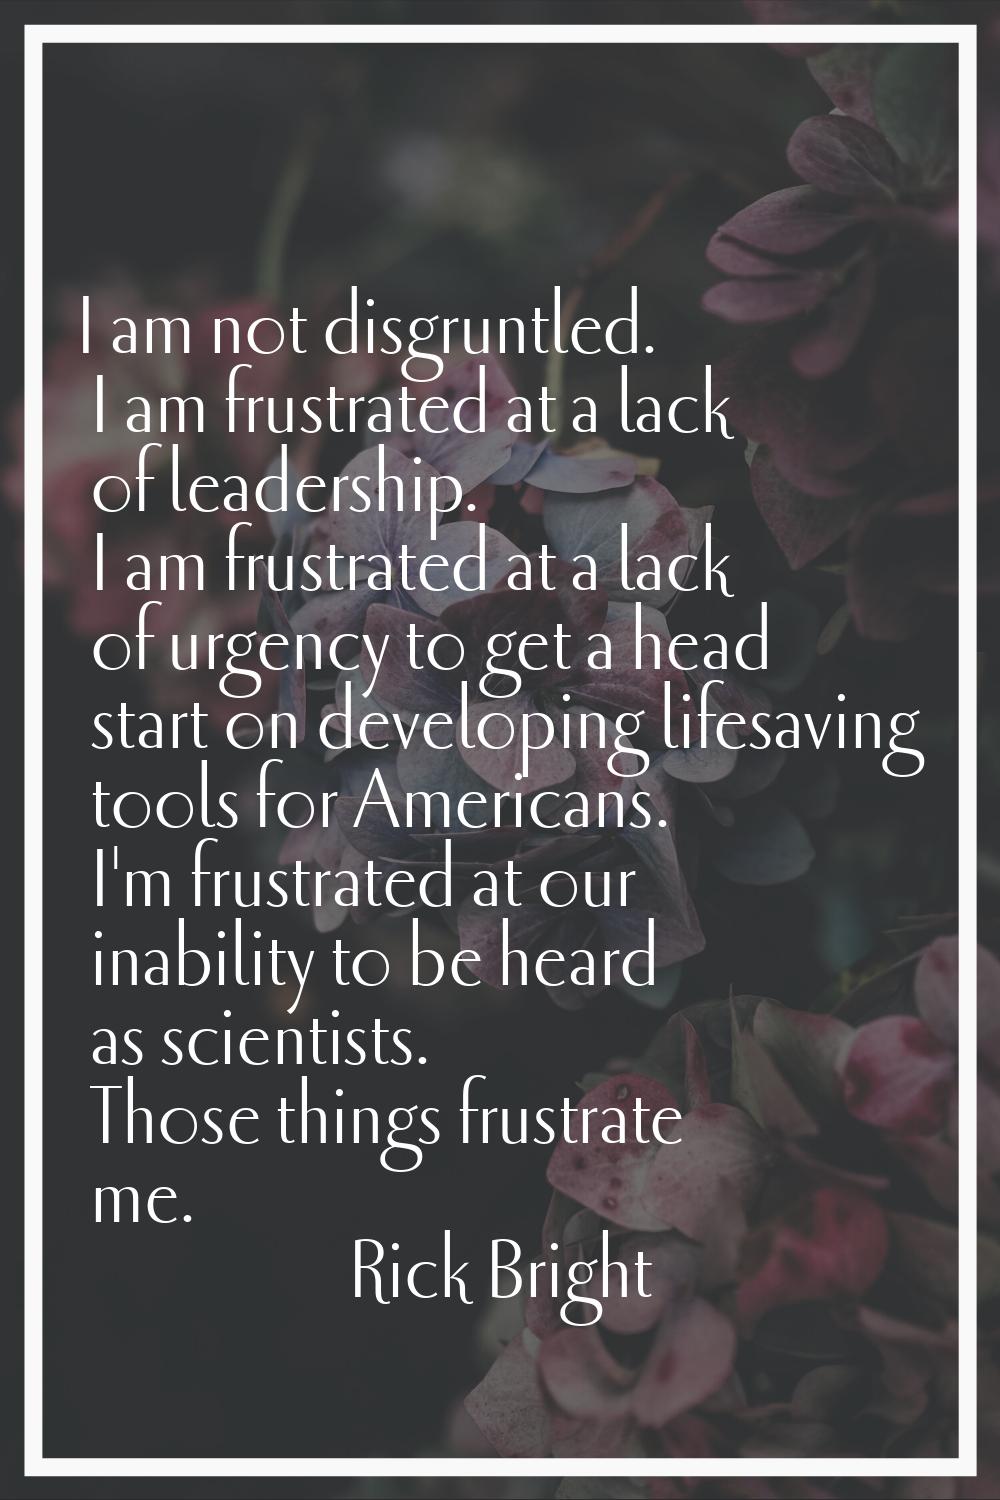 I am not disgruntled. I am frustrated at a lack of leadership. I am frustrated at a lack of urgency